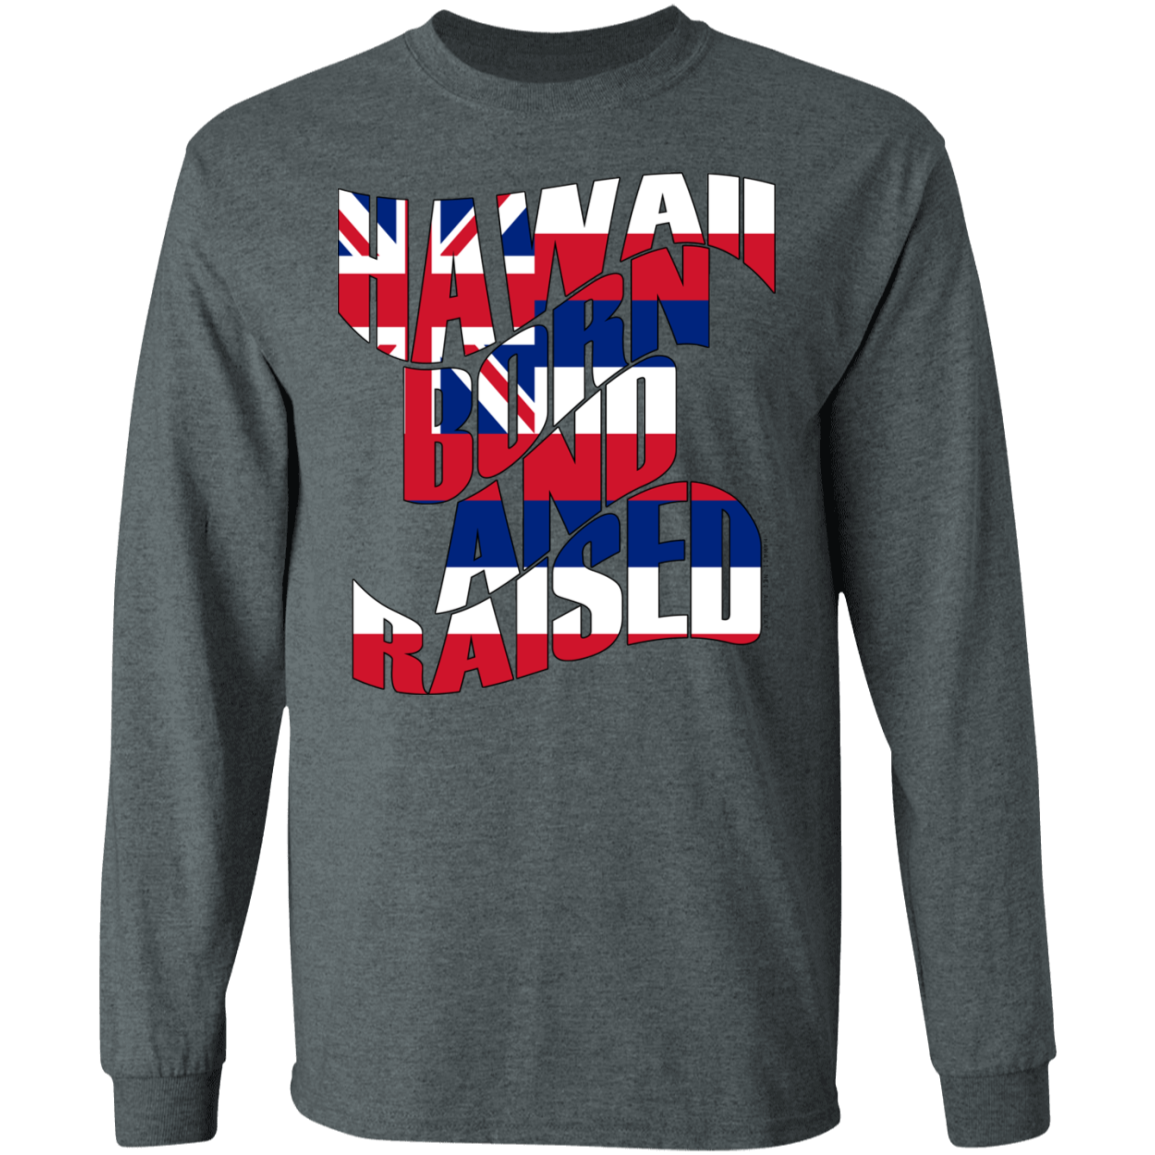 Hawaii Born and Raised Flag LS Ultra Cotton T-Shirt, T-Shirts, Hawaii Nei All Day